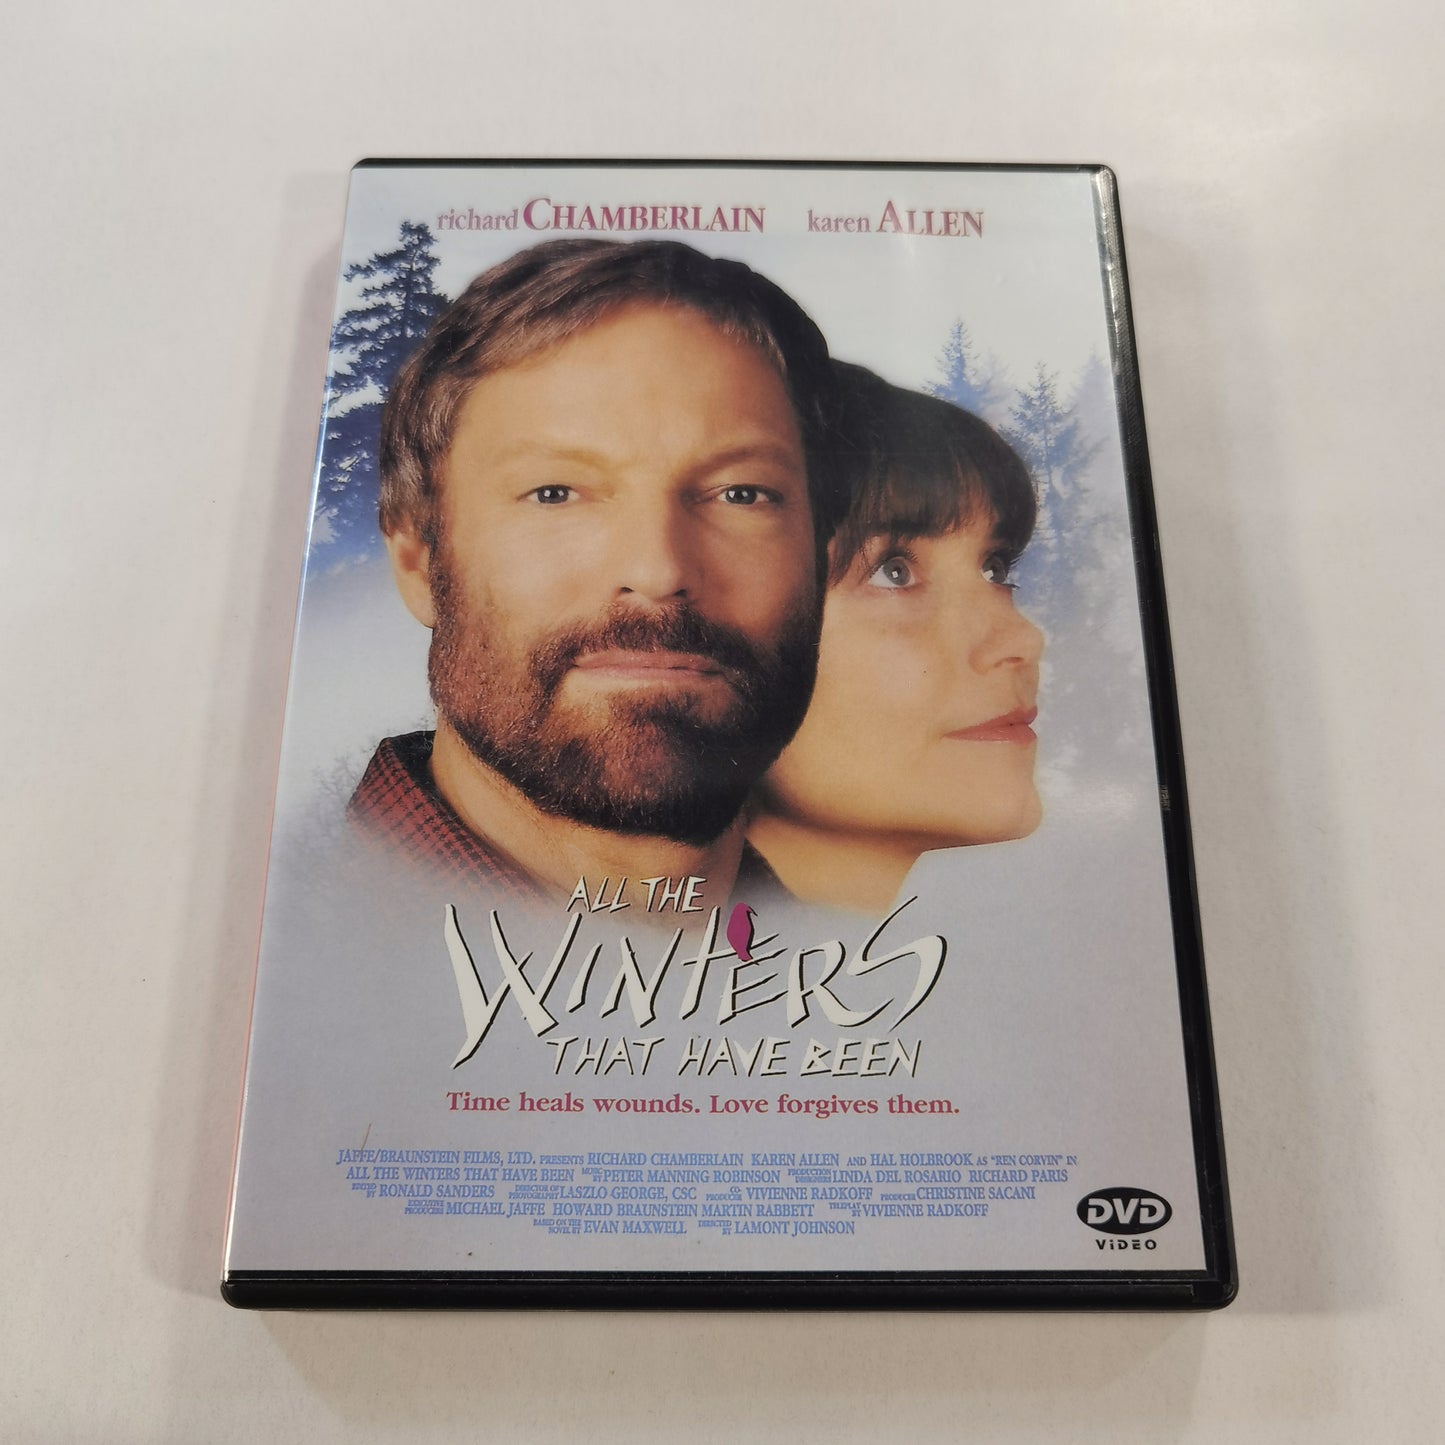 All the Winters That Have Been (1997) - DVD SE NO DK